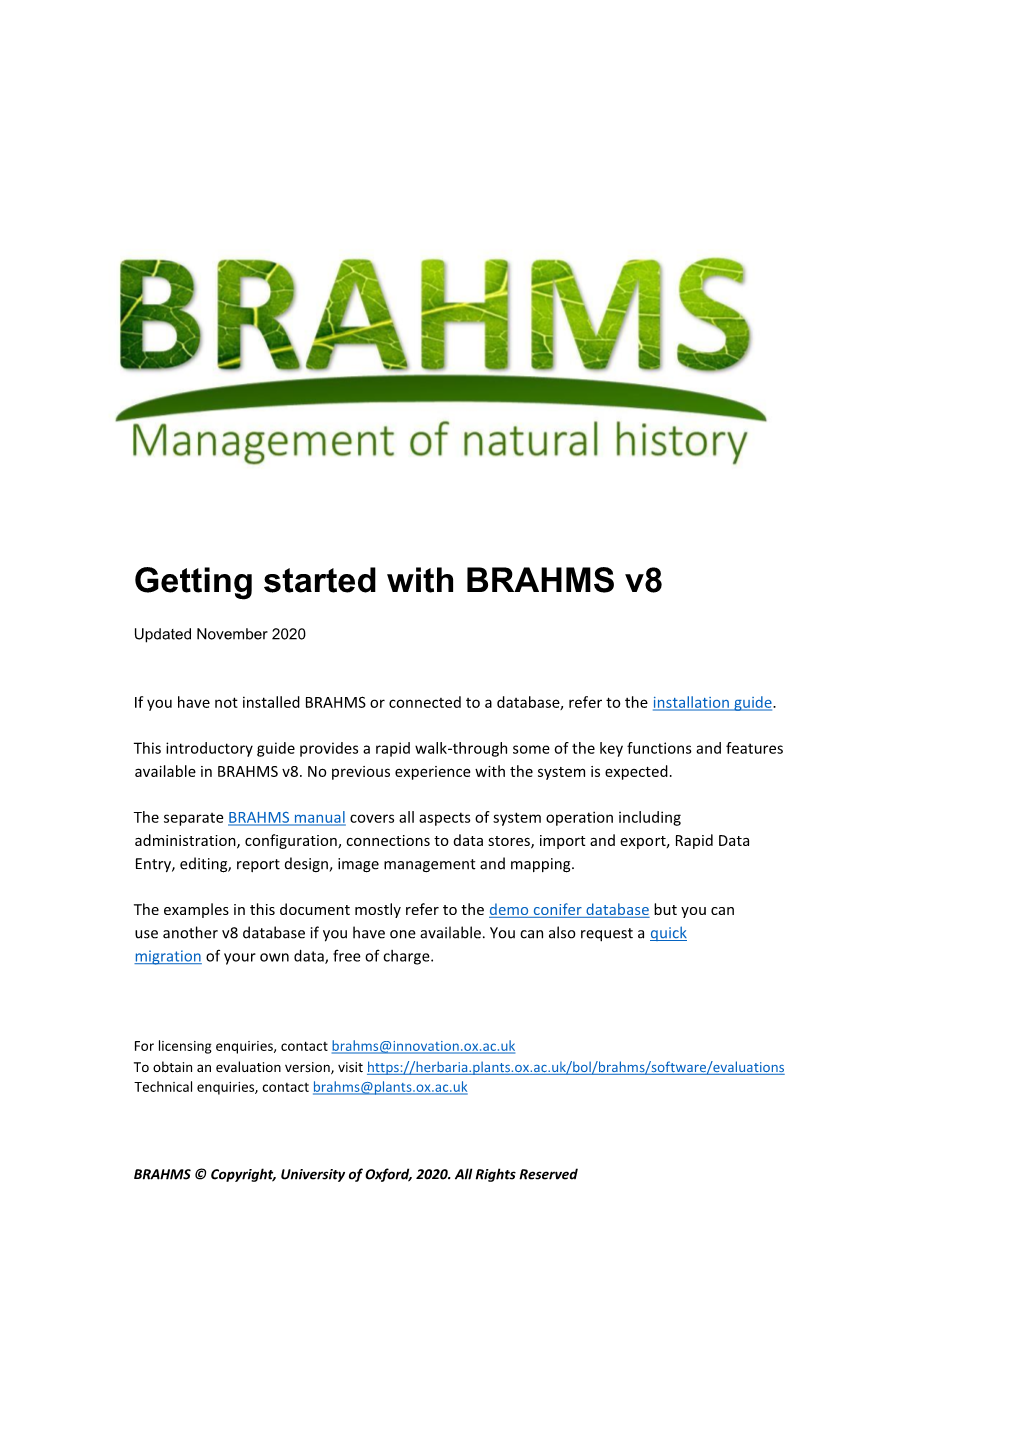 Getting Started with BRAHMS V8